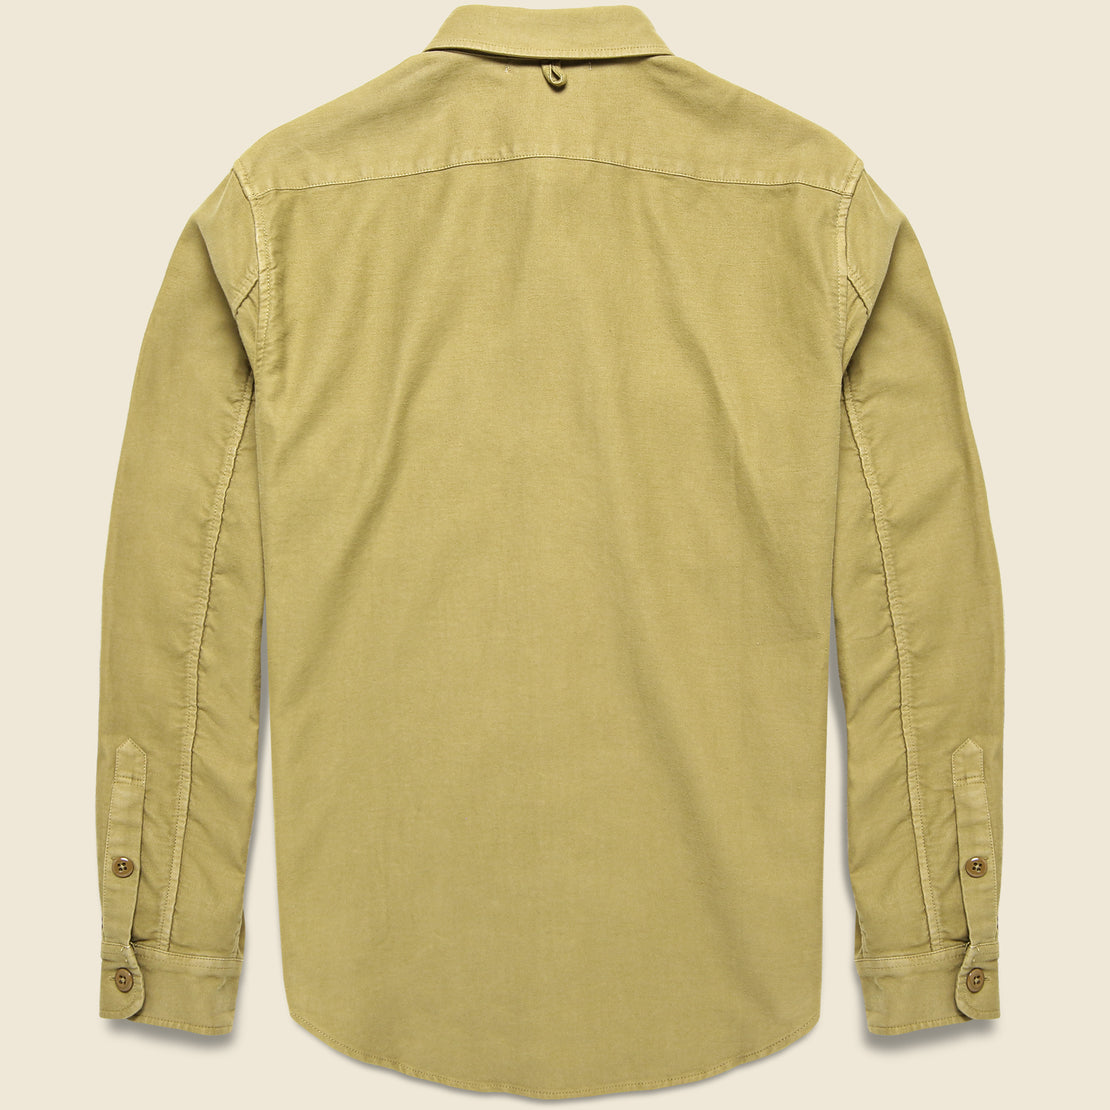 Chamois Frontier Shirt - Khaki - Alex Mill - STAG Provisions - Tops - L/S Woven - Solid